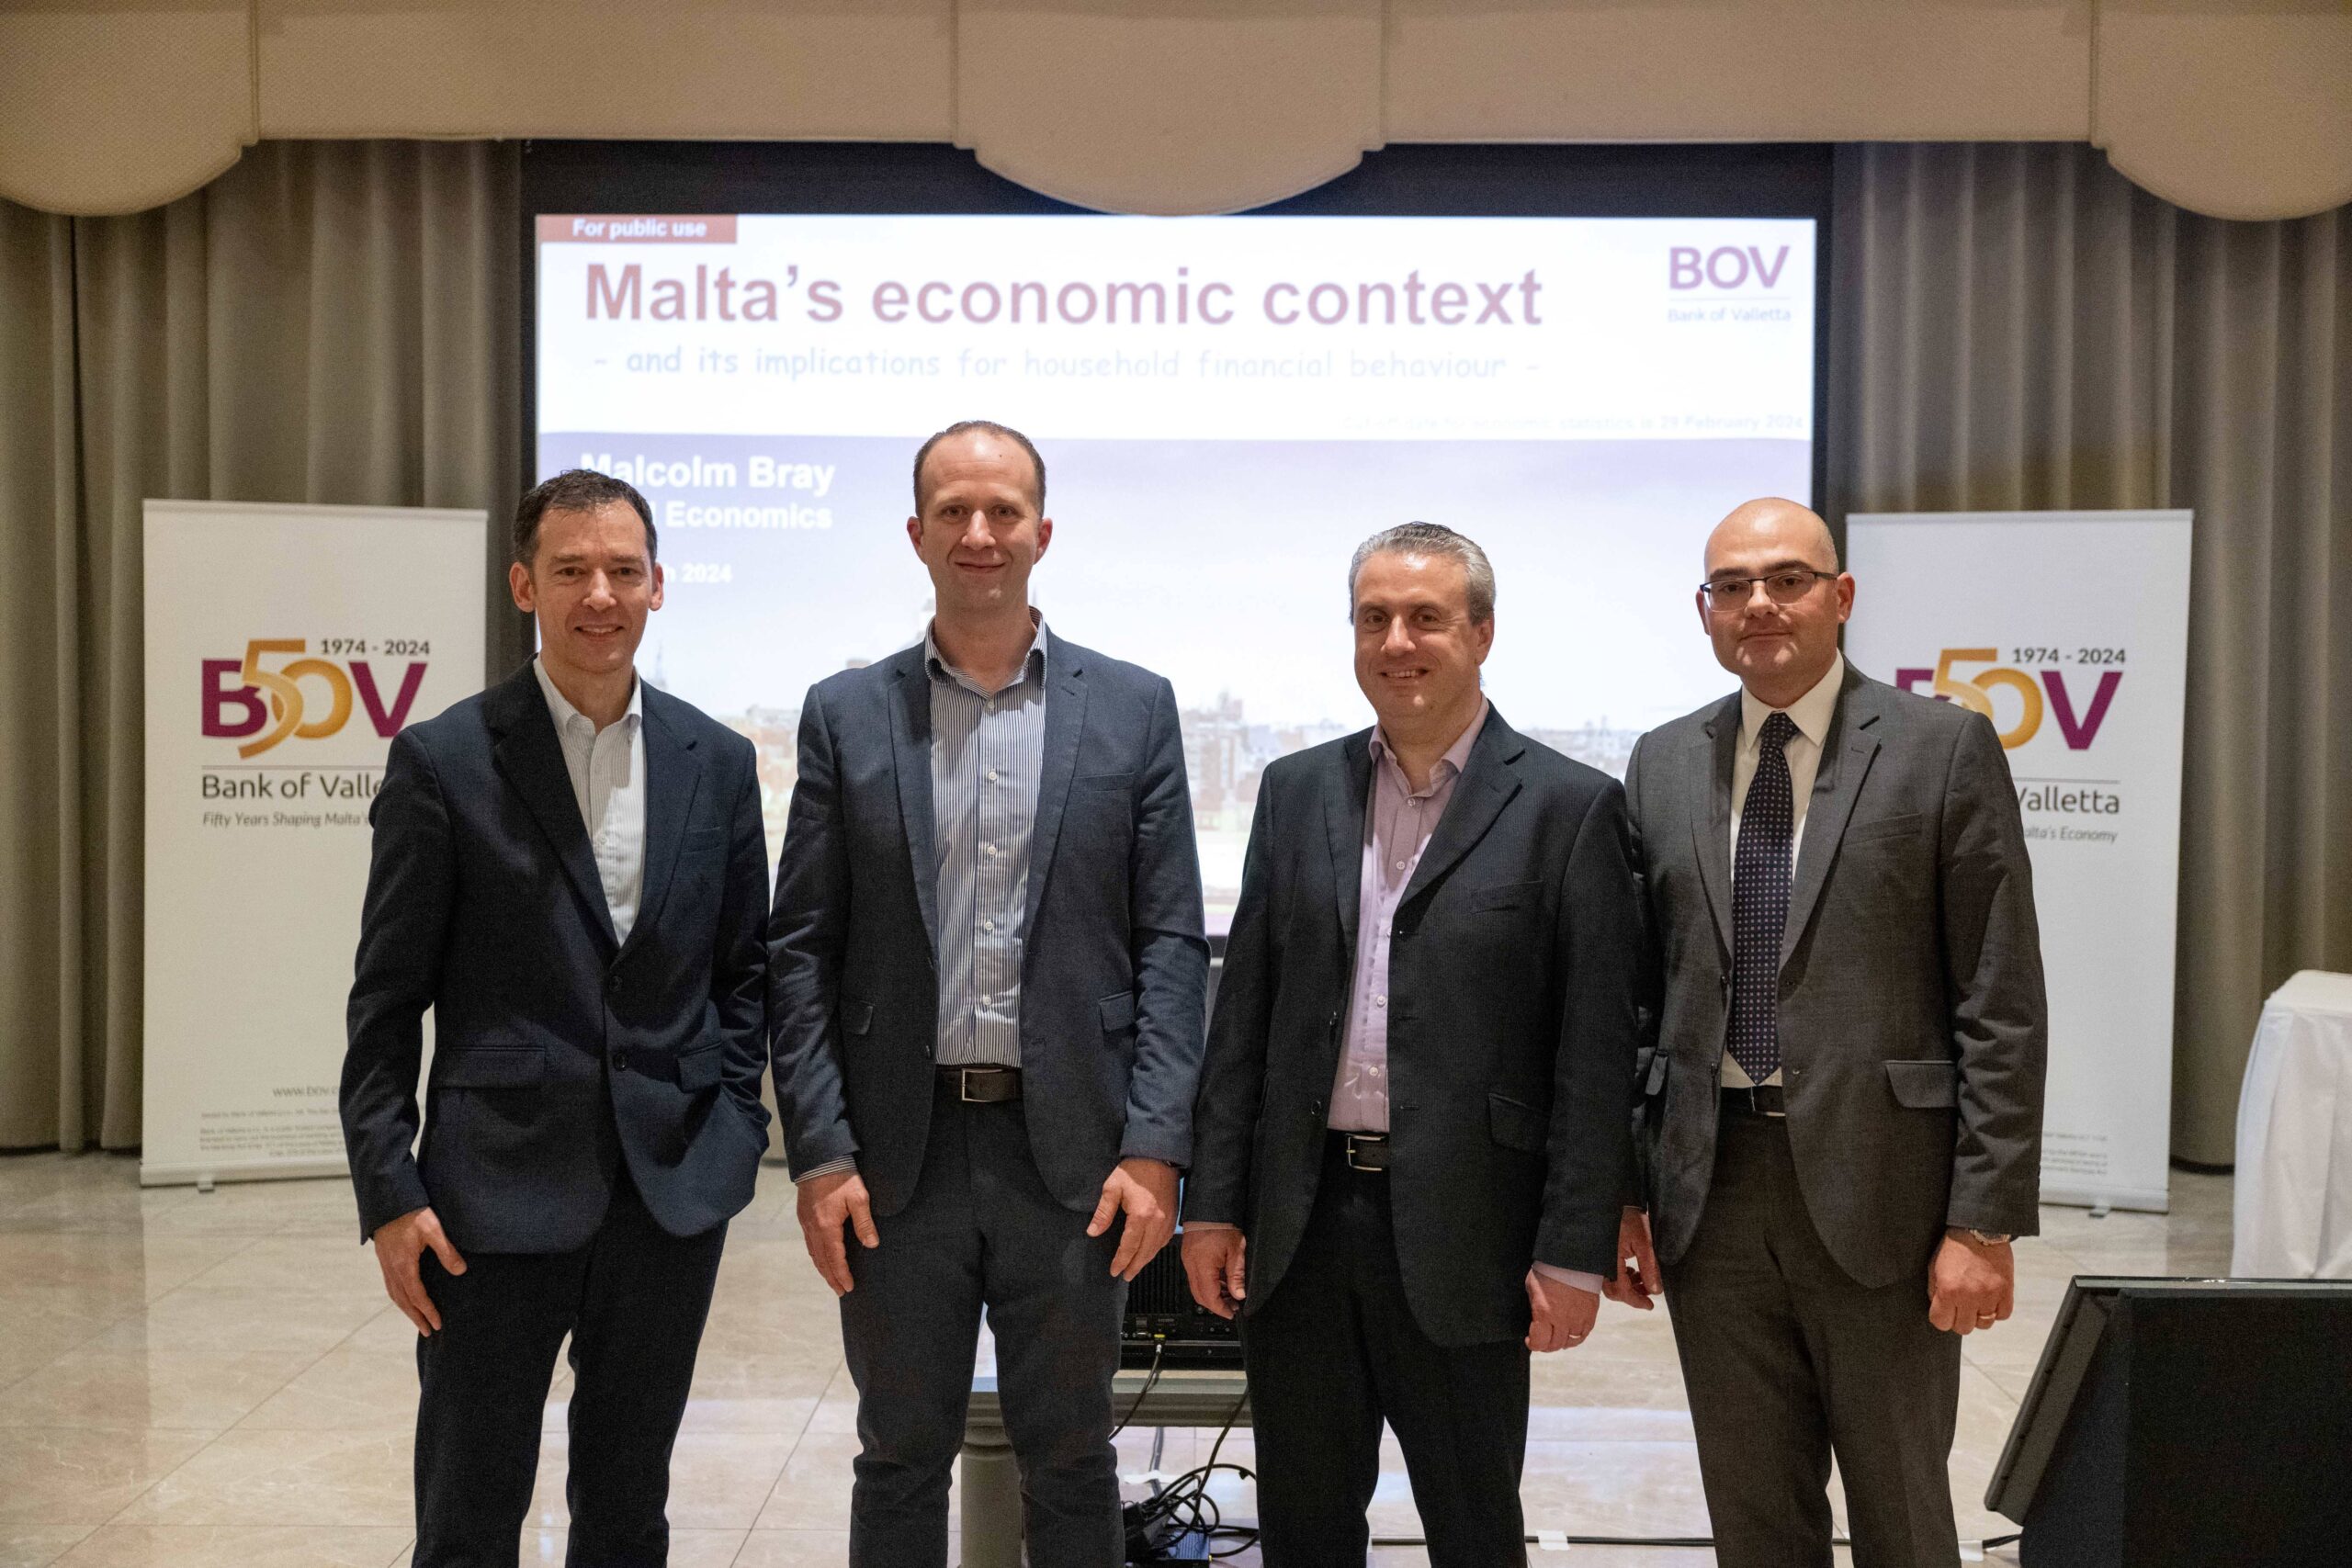 BOV experts discuss economy and investment basics with retail clients